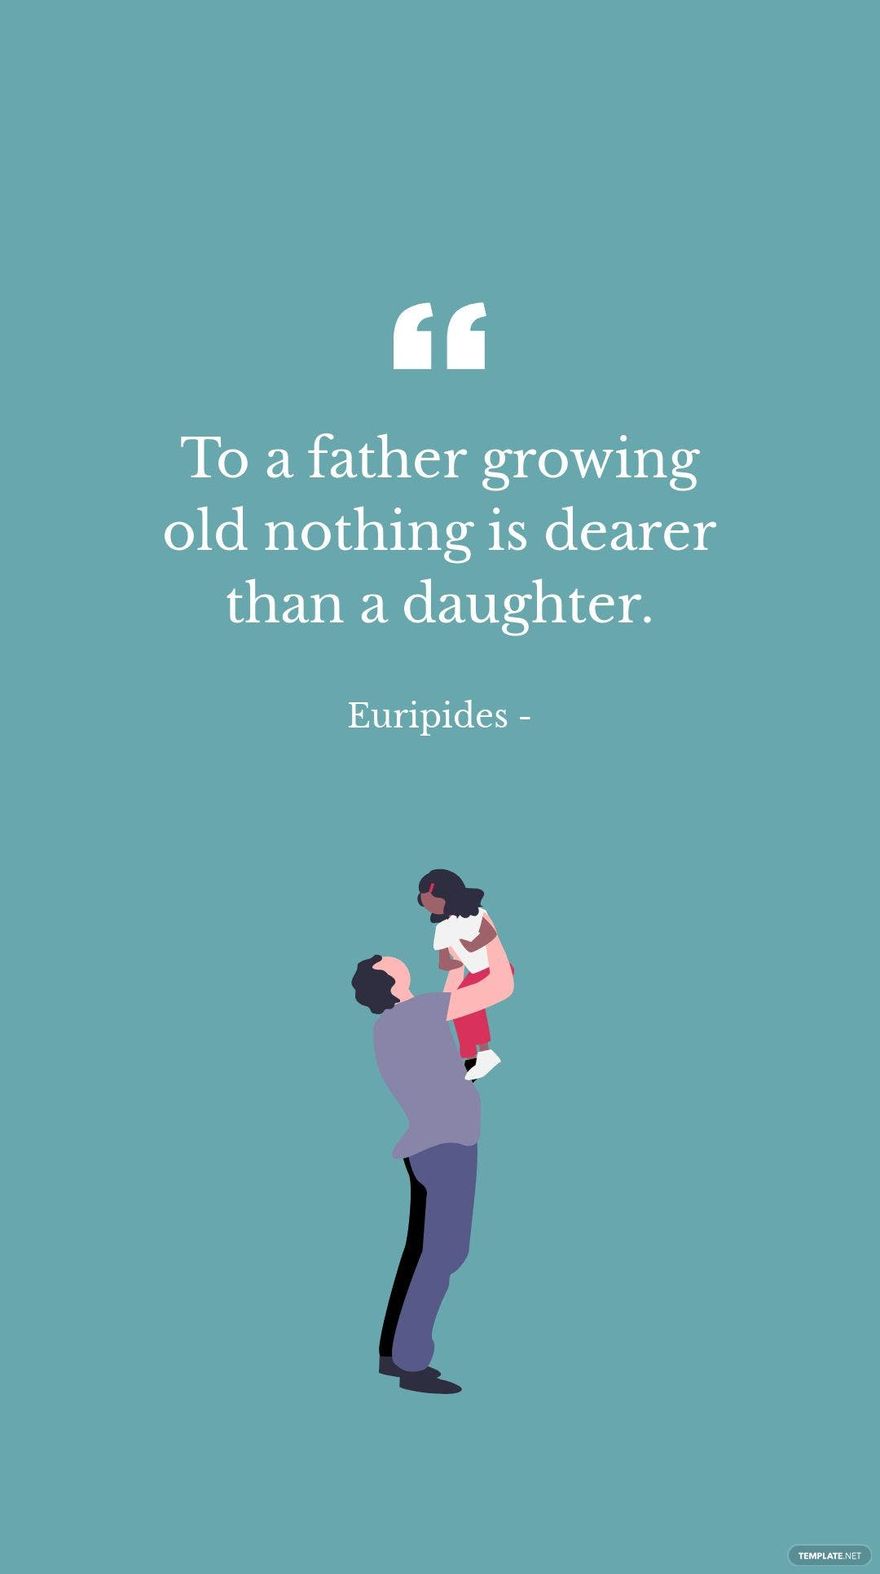 EURIPIDES - To a father growing old nothing is dearer than a daughter.